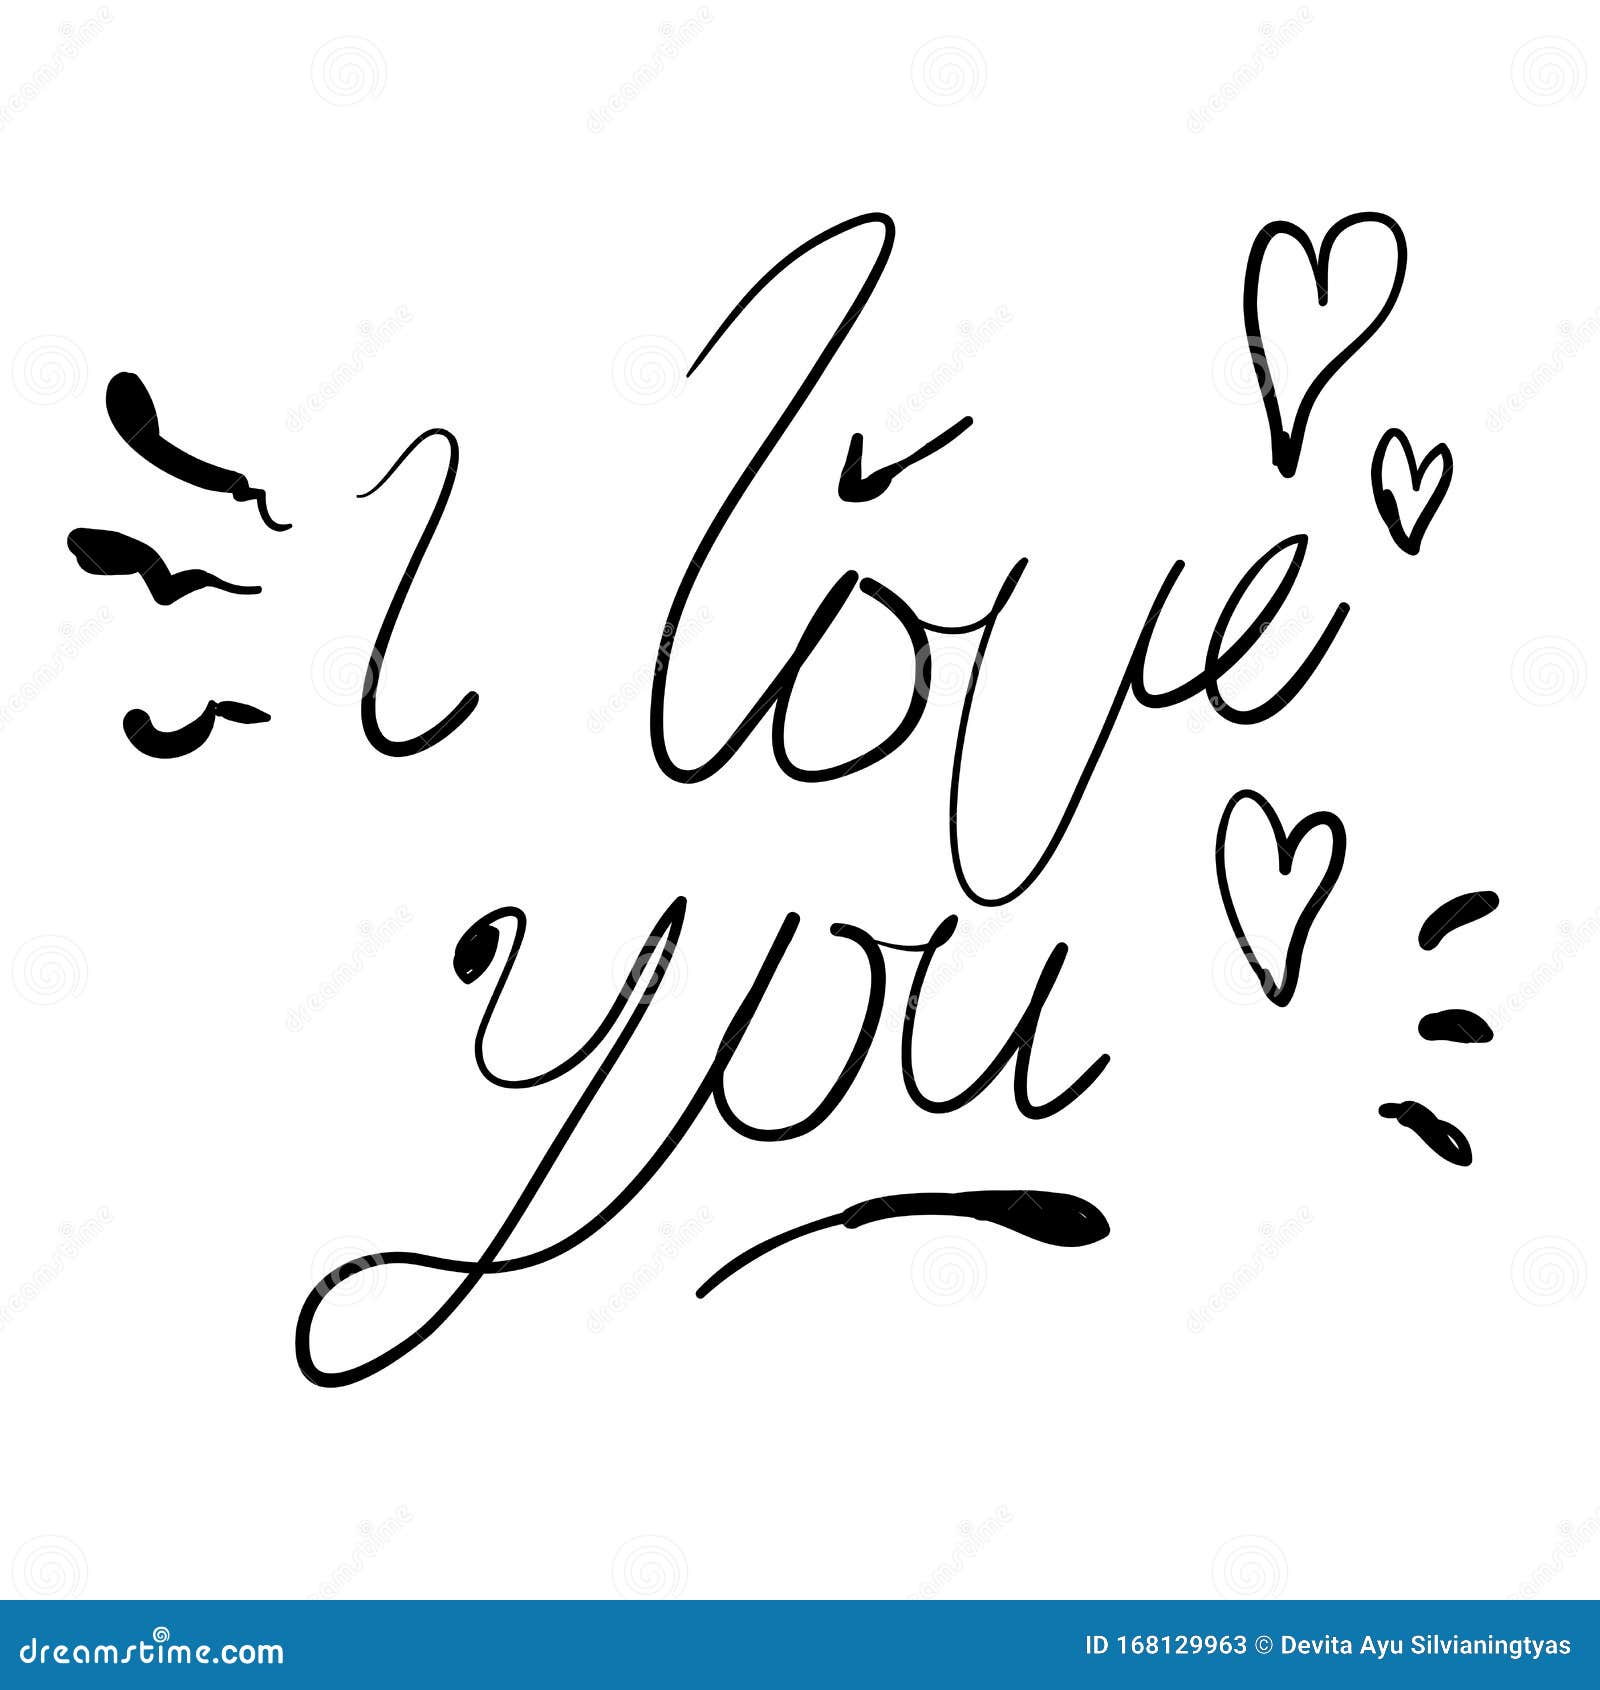 I Love You Doodle Quotes with Hand Drawn Cartoon Style Stock Vector ...